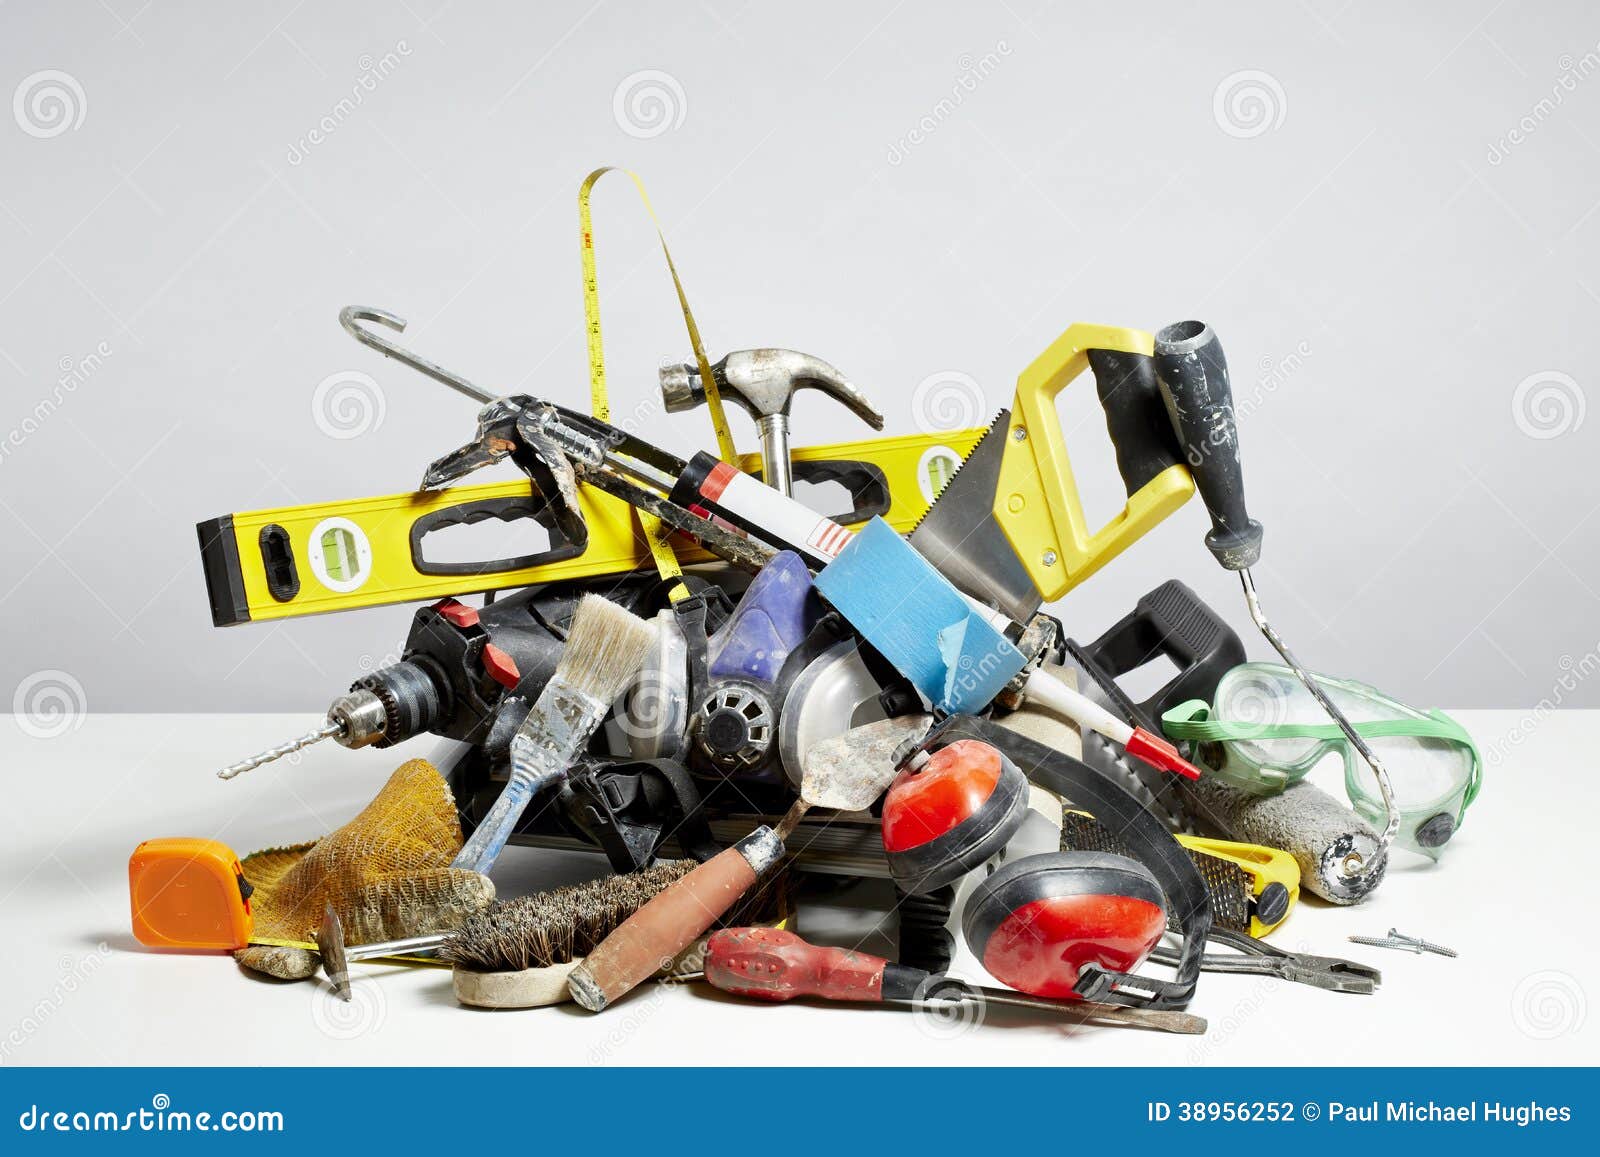 do it yourself tools in pile on white background